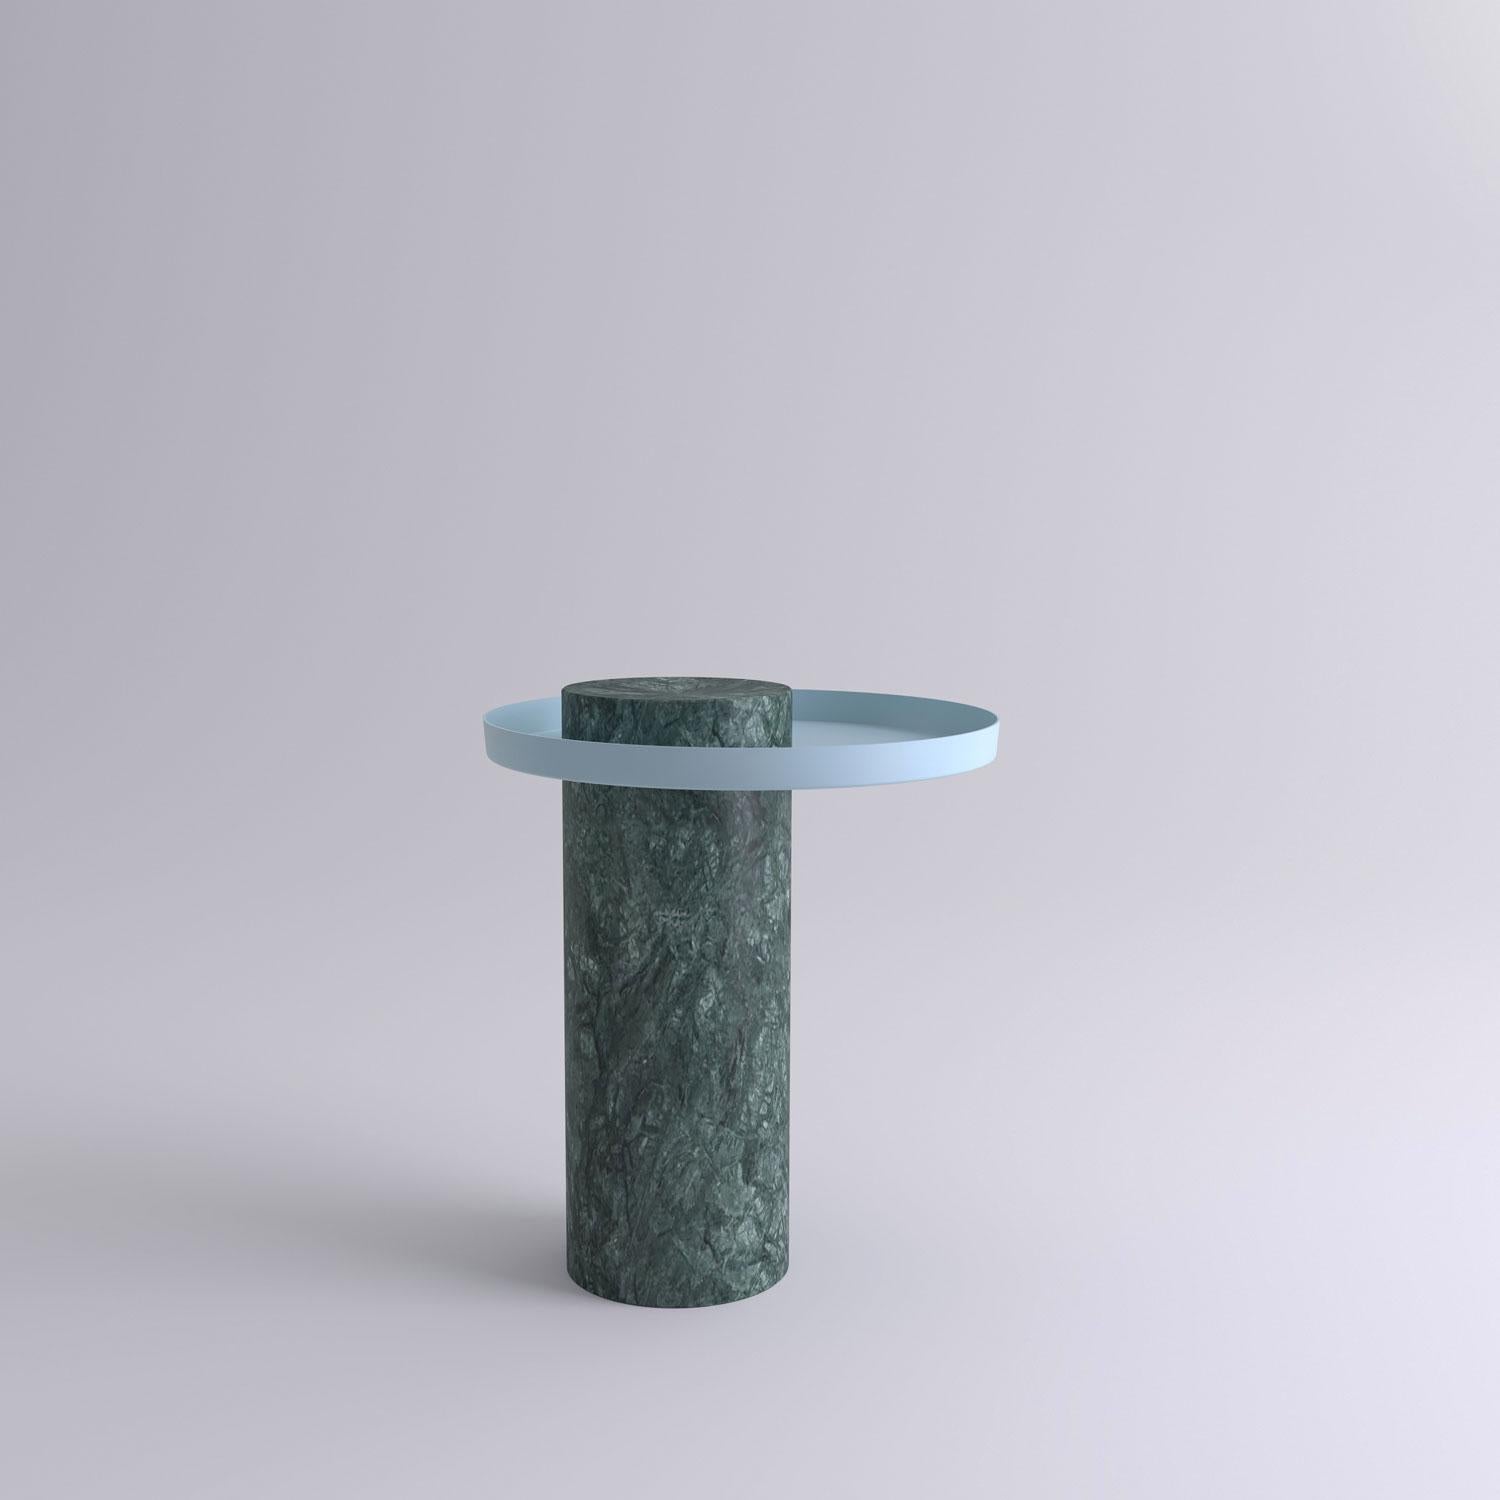 Medium Indian green contemporary guéridon, Sebastian Herkner
Dimensions: D 40 x H 46 cm.
Materials: Indian green marble, light blue metal tray.

The salute table exists in 3 sizes, 4 different marble stones for the column and 5 different